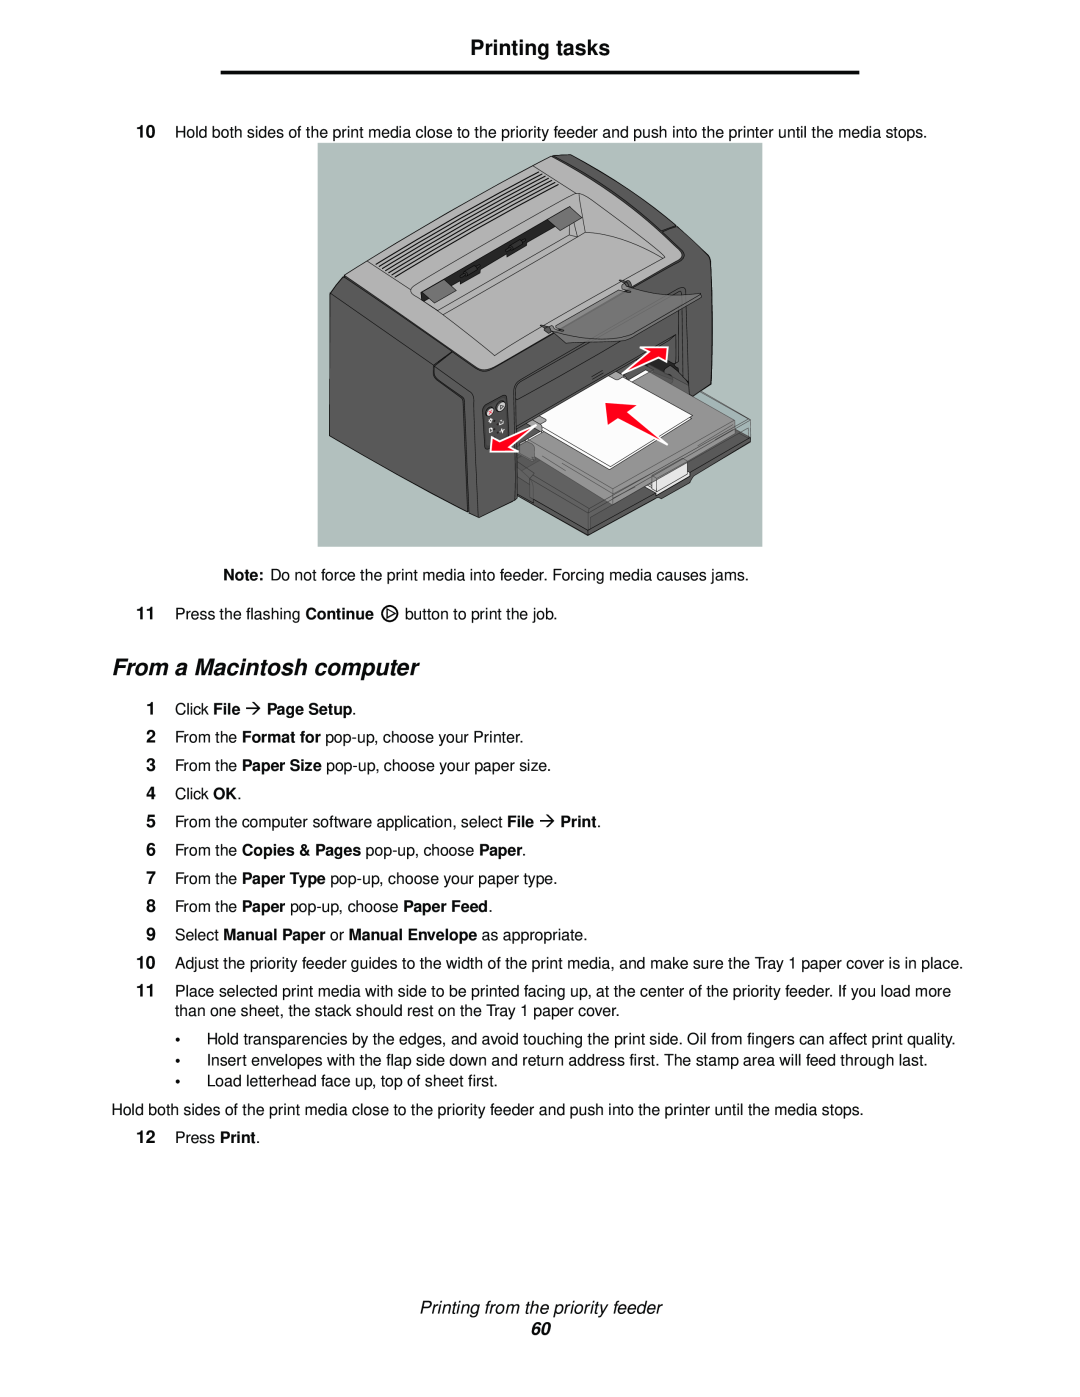 Lexmark 120 From a Macintosh computer, Click File Æ Page Setup, Select Manual Paper or Manual Envelope as appropriate 